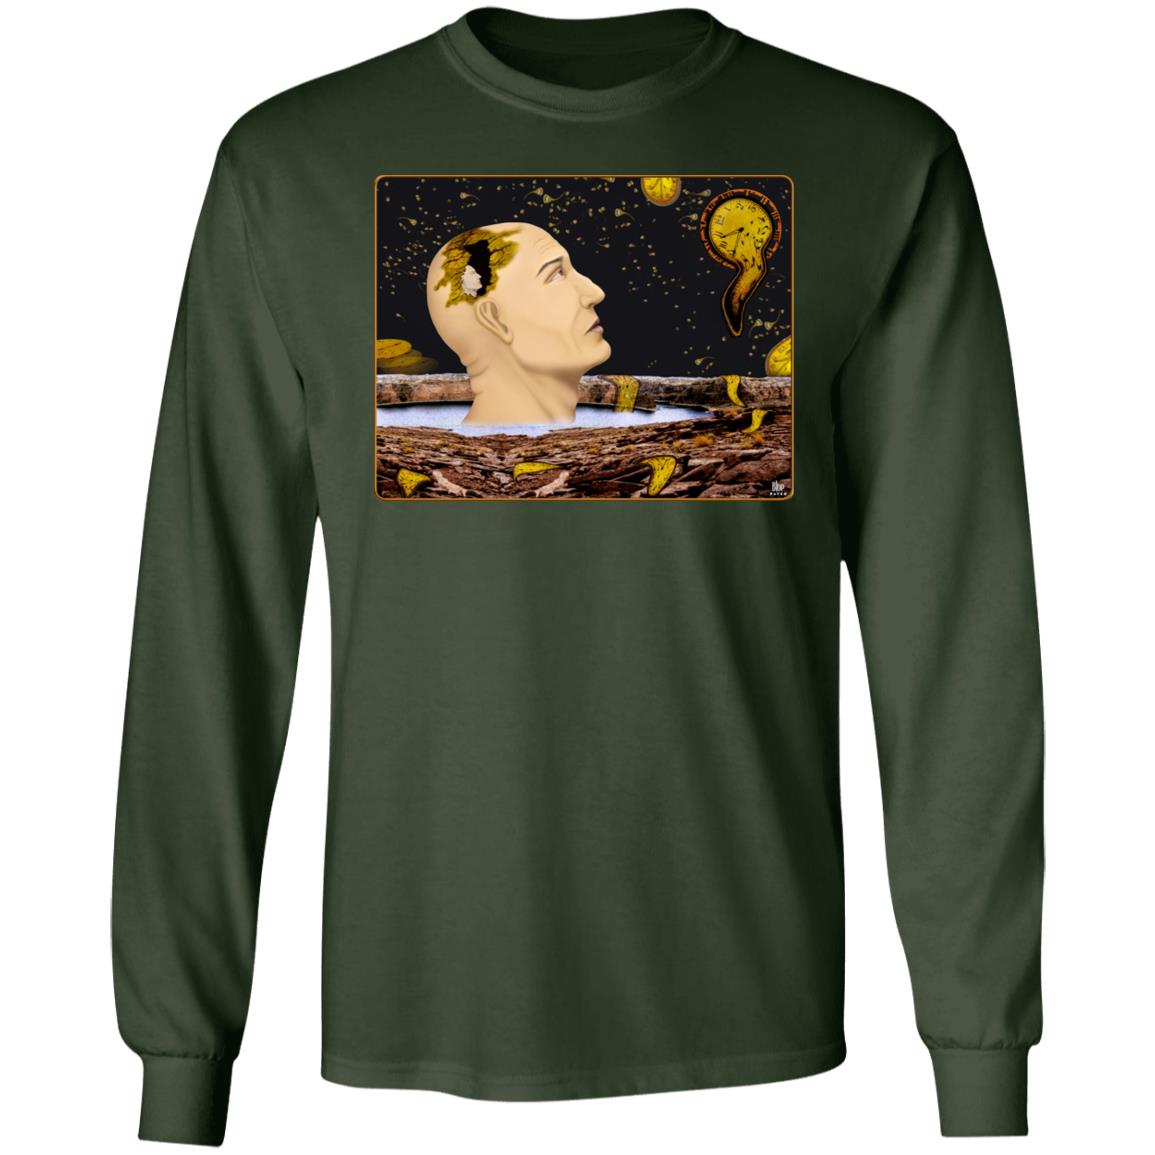 Earth Time Running Out – Men’s Long Sleeve T-Shirt